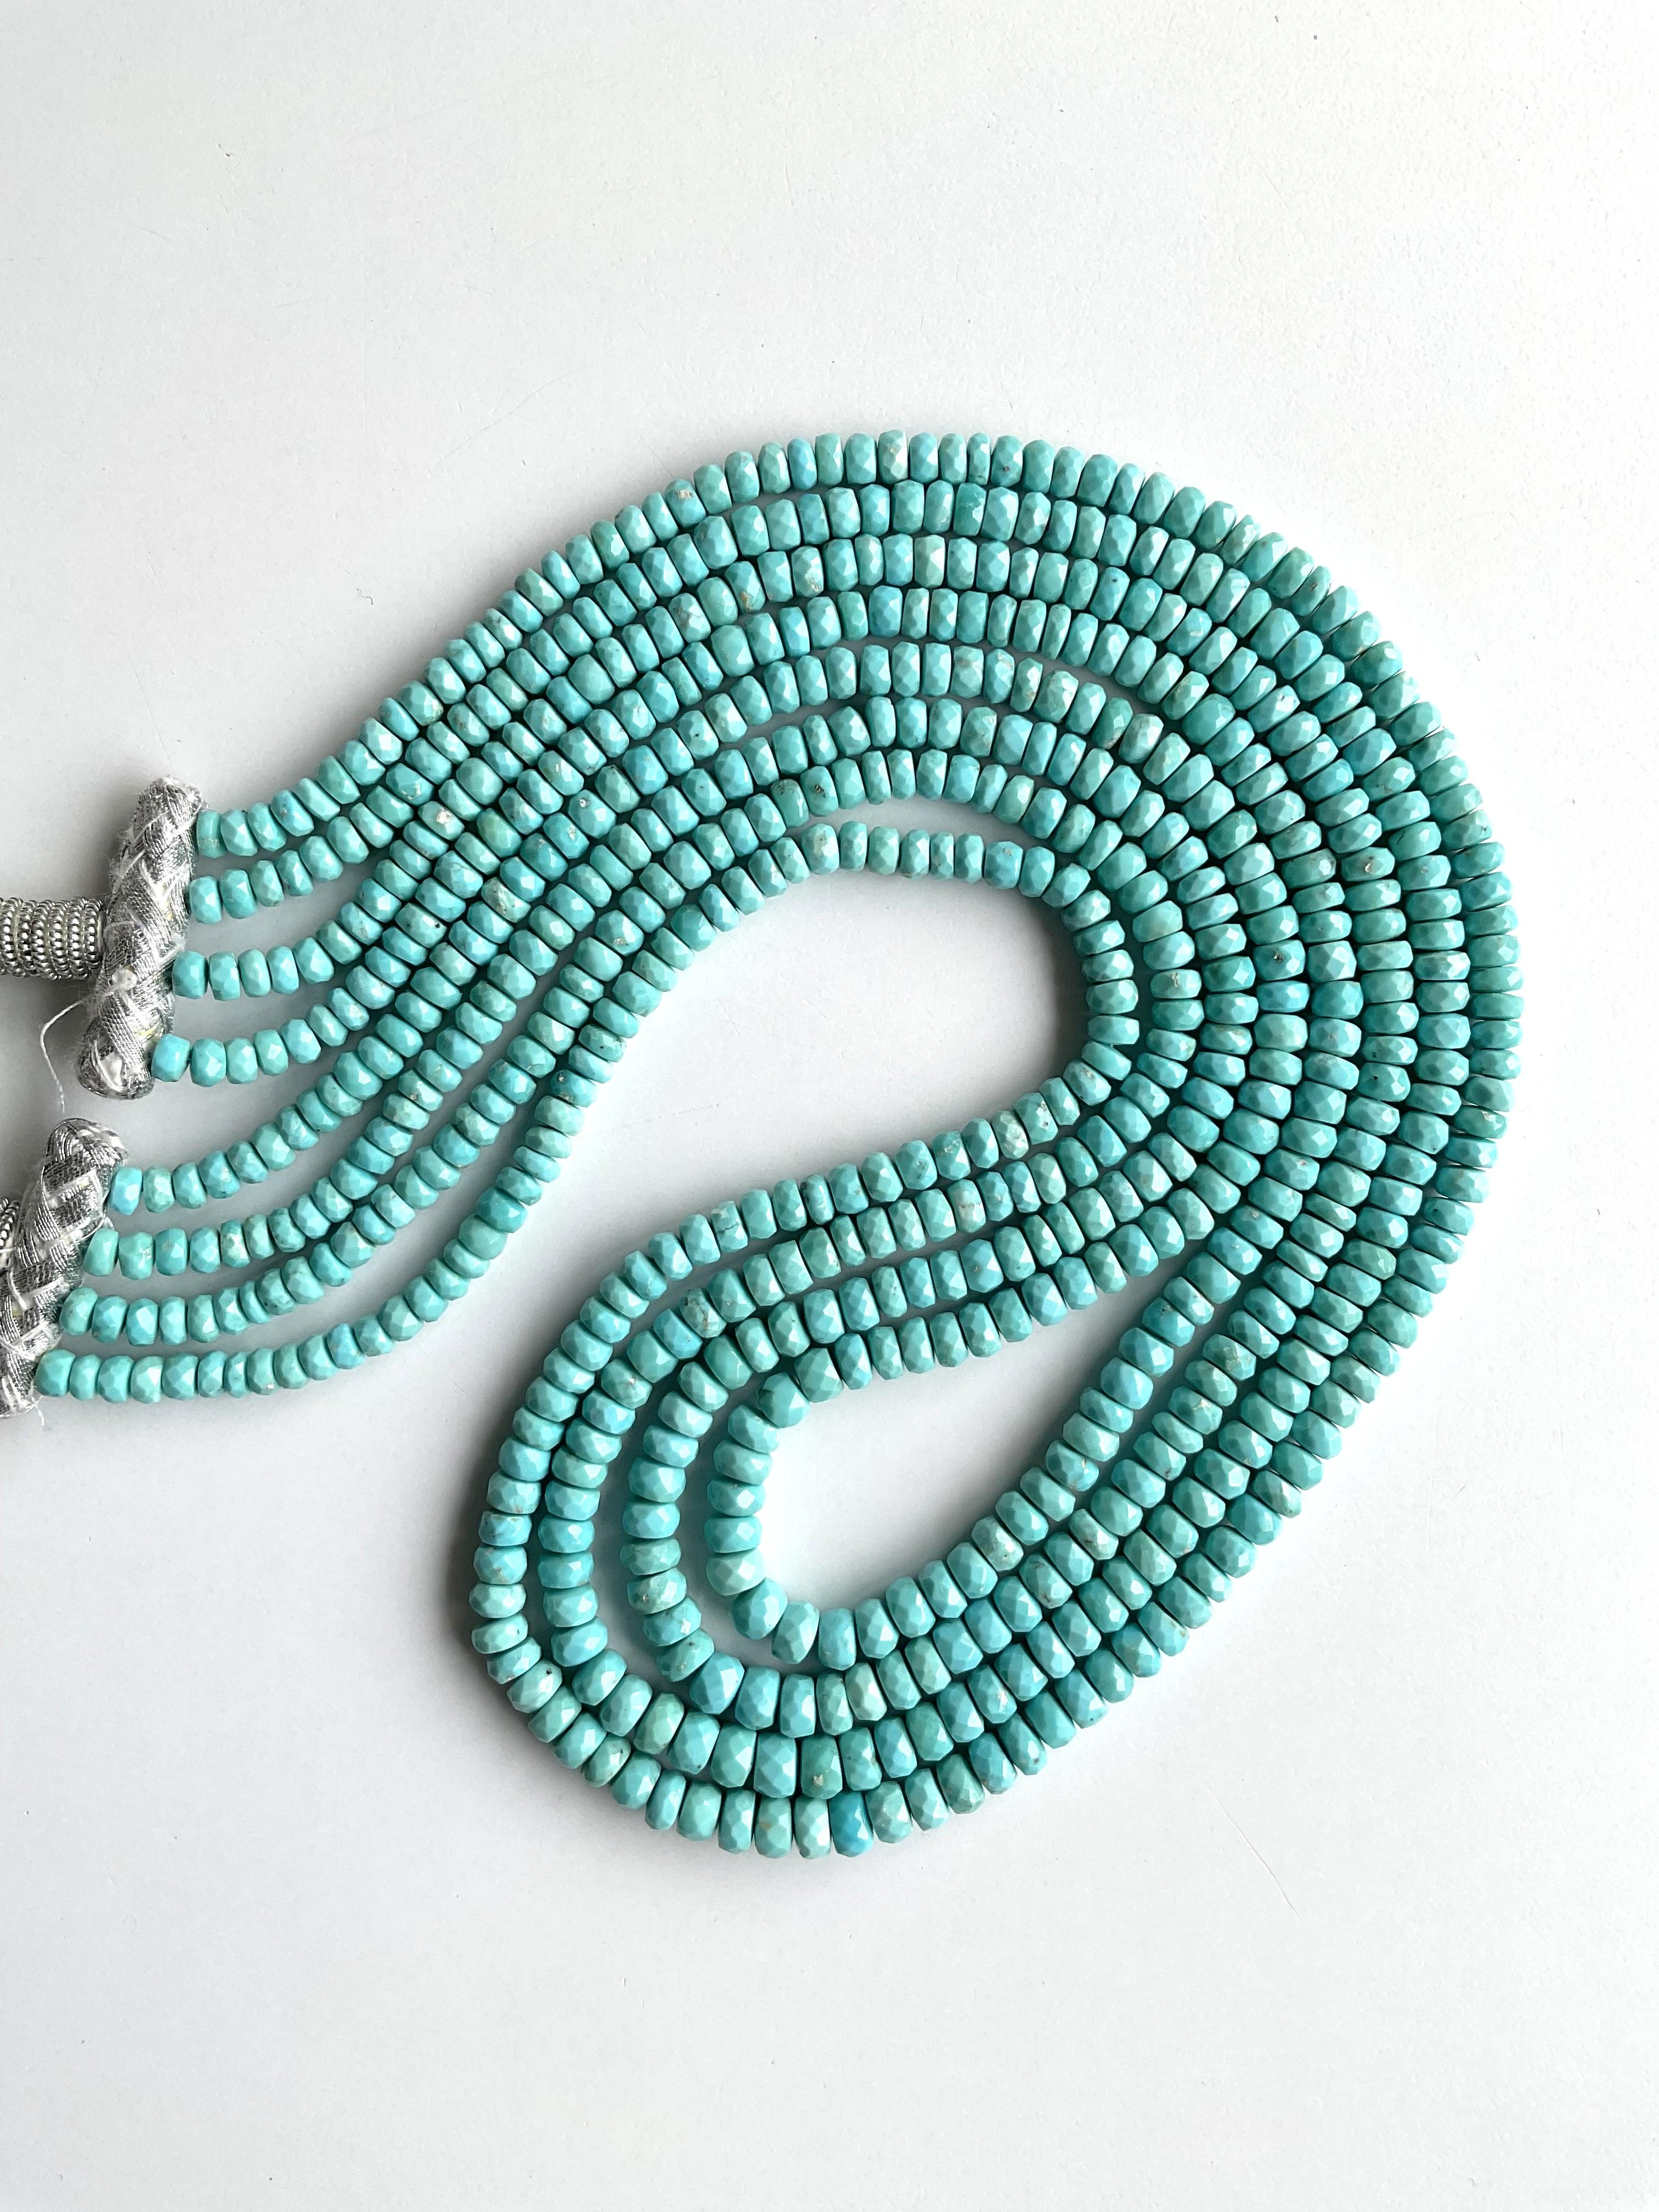 Women's or Men's 273.62 Carats Turquoise Jewelry Beaded Faceted Necklace Sleeping Beauty Arizona